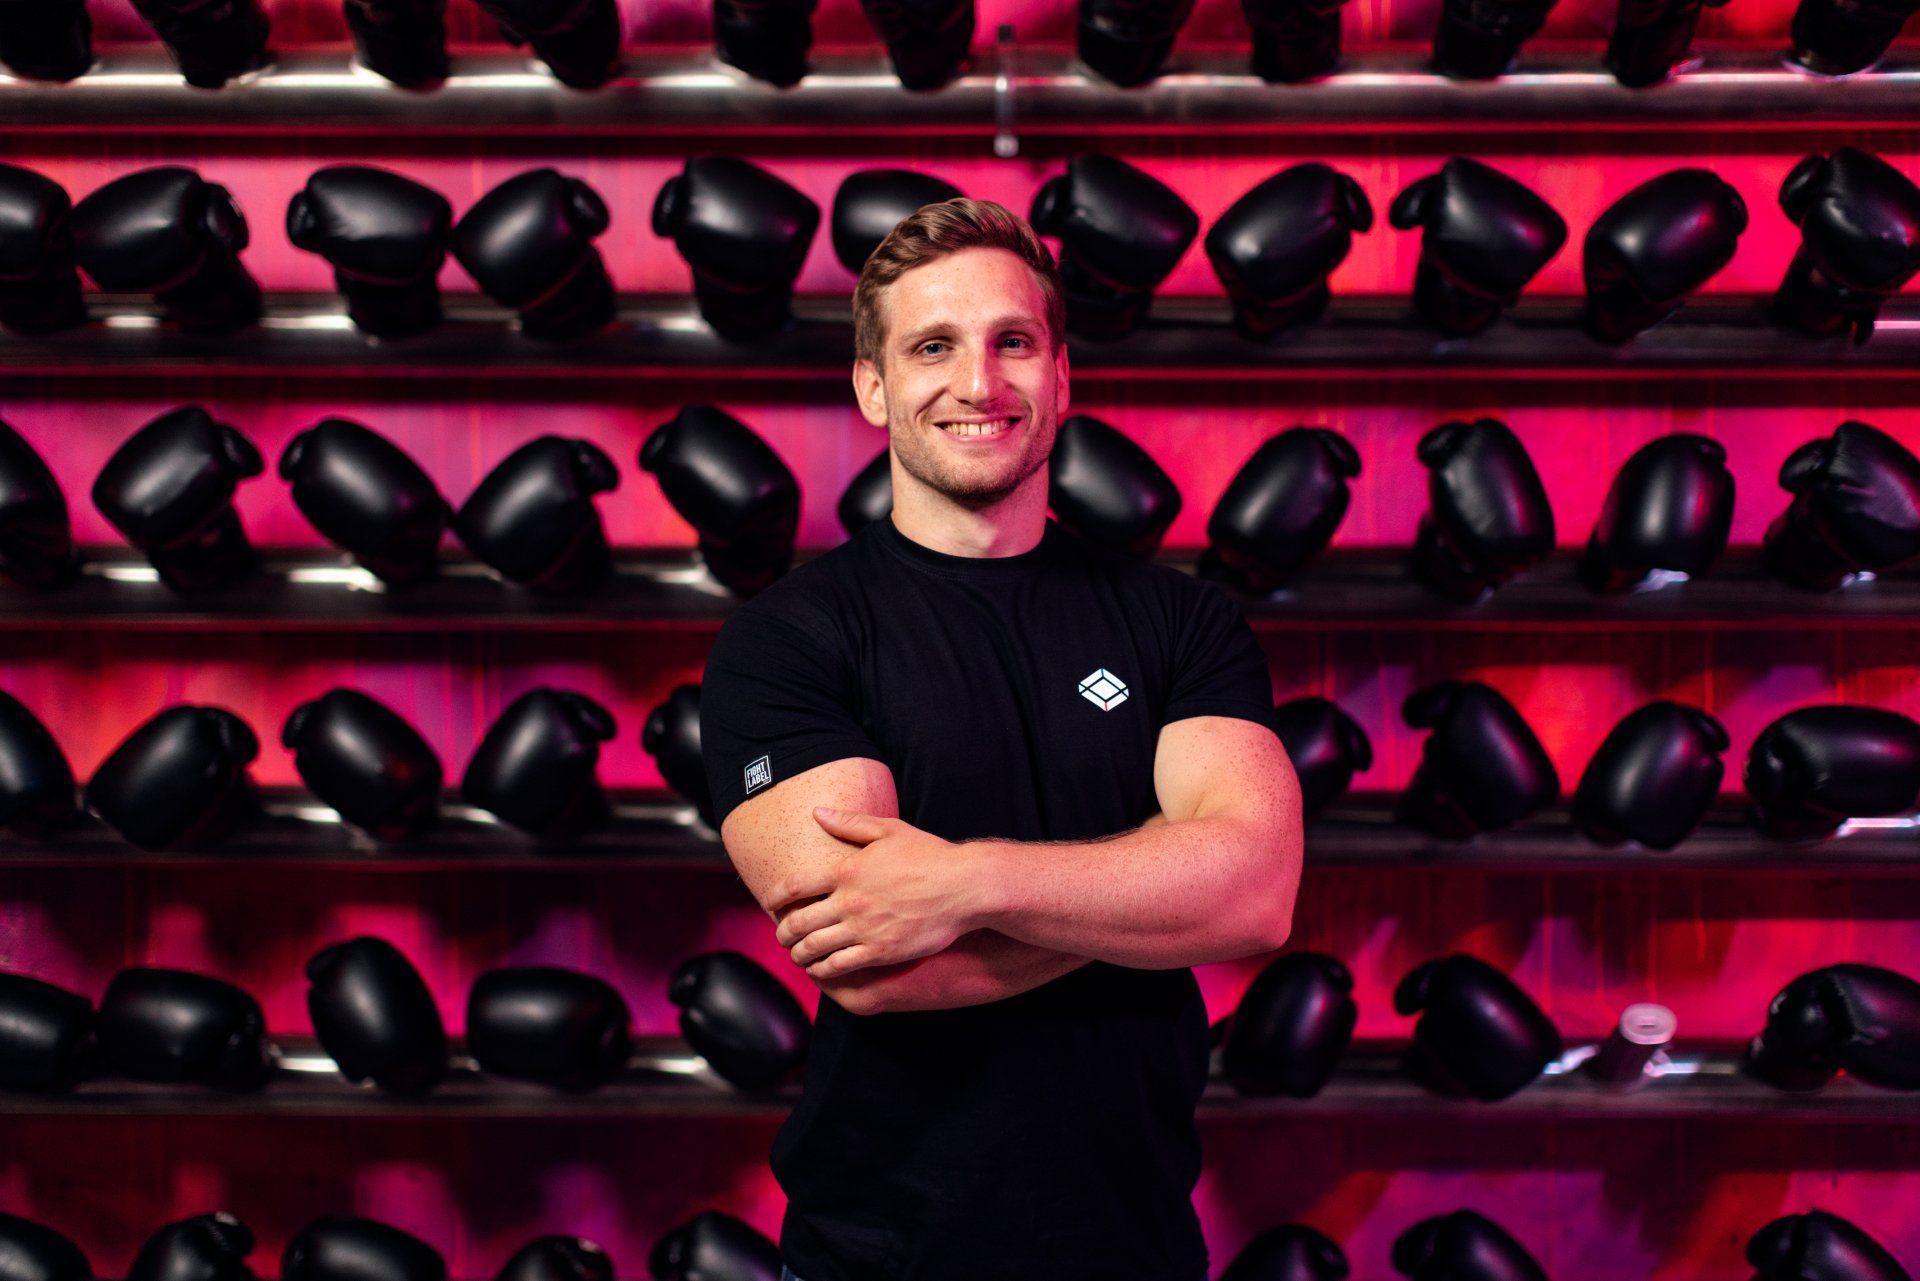 Fitness Profesional standing in front of a shelves full of boxing gloves